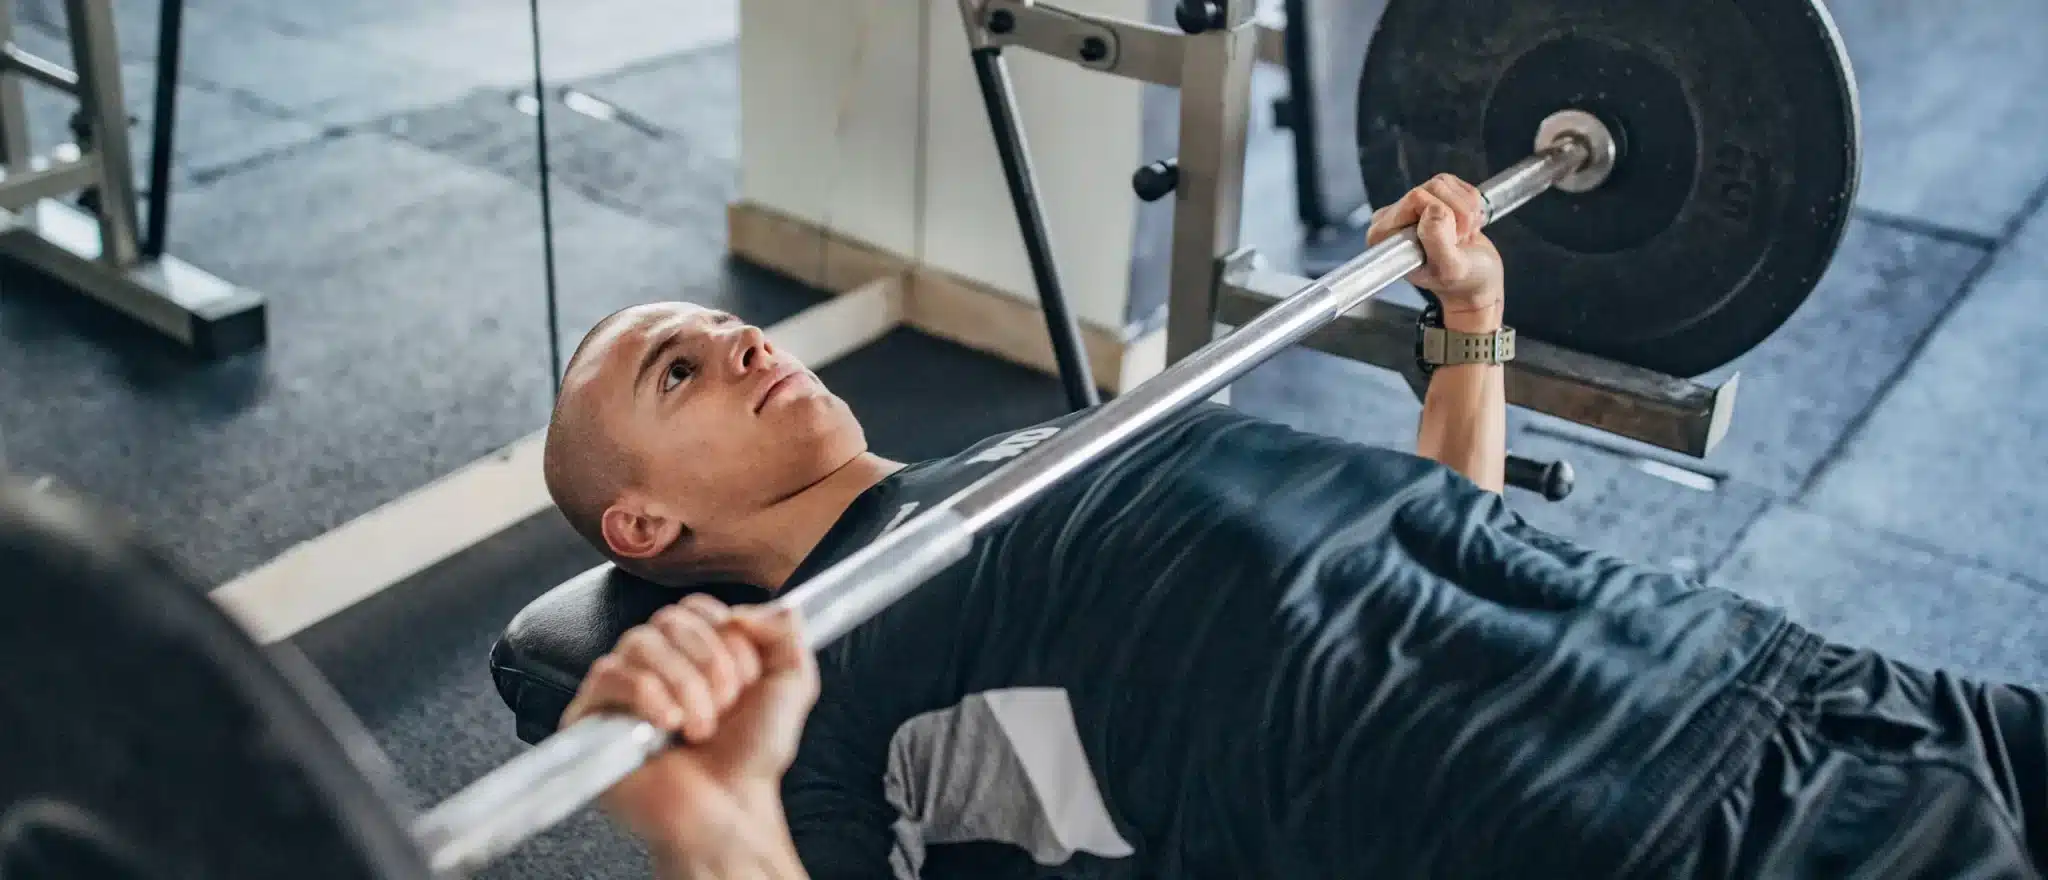 Asking For a Friend: Exactly How Much Should You Be Able to Bench?